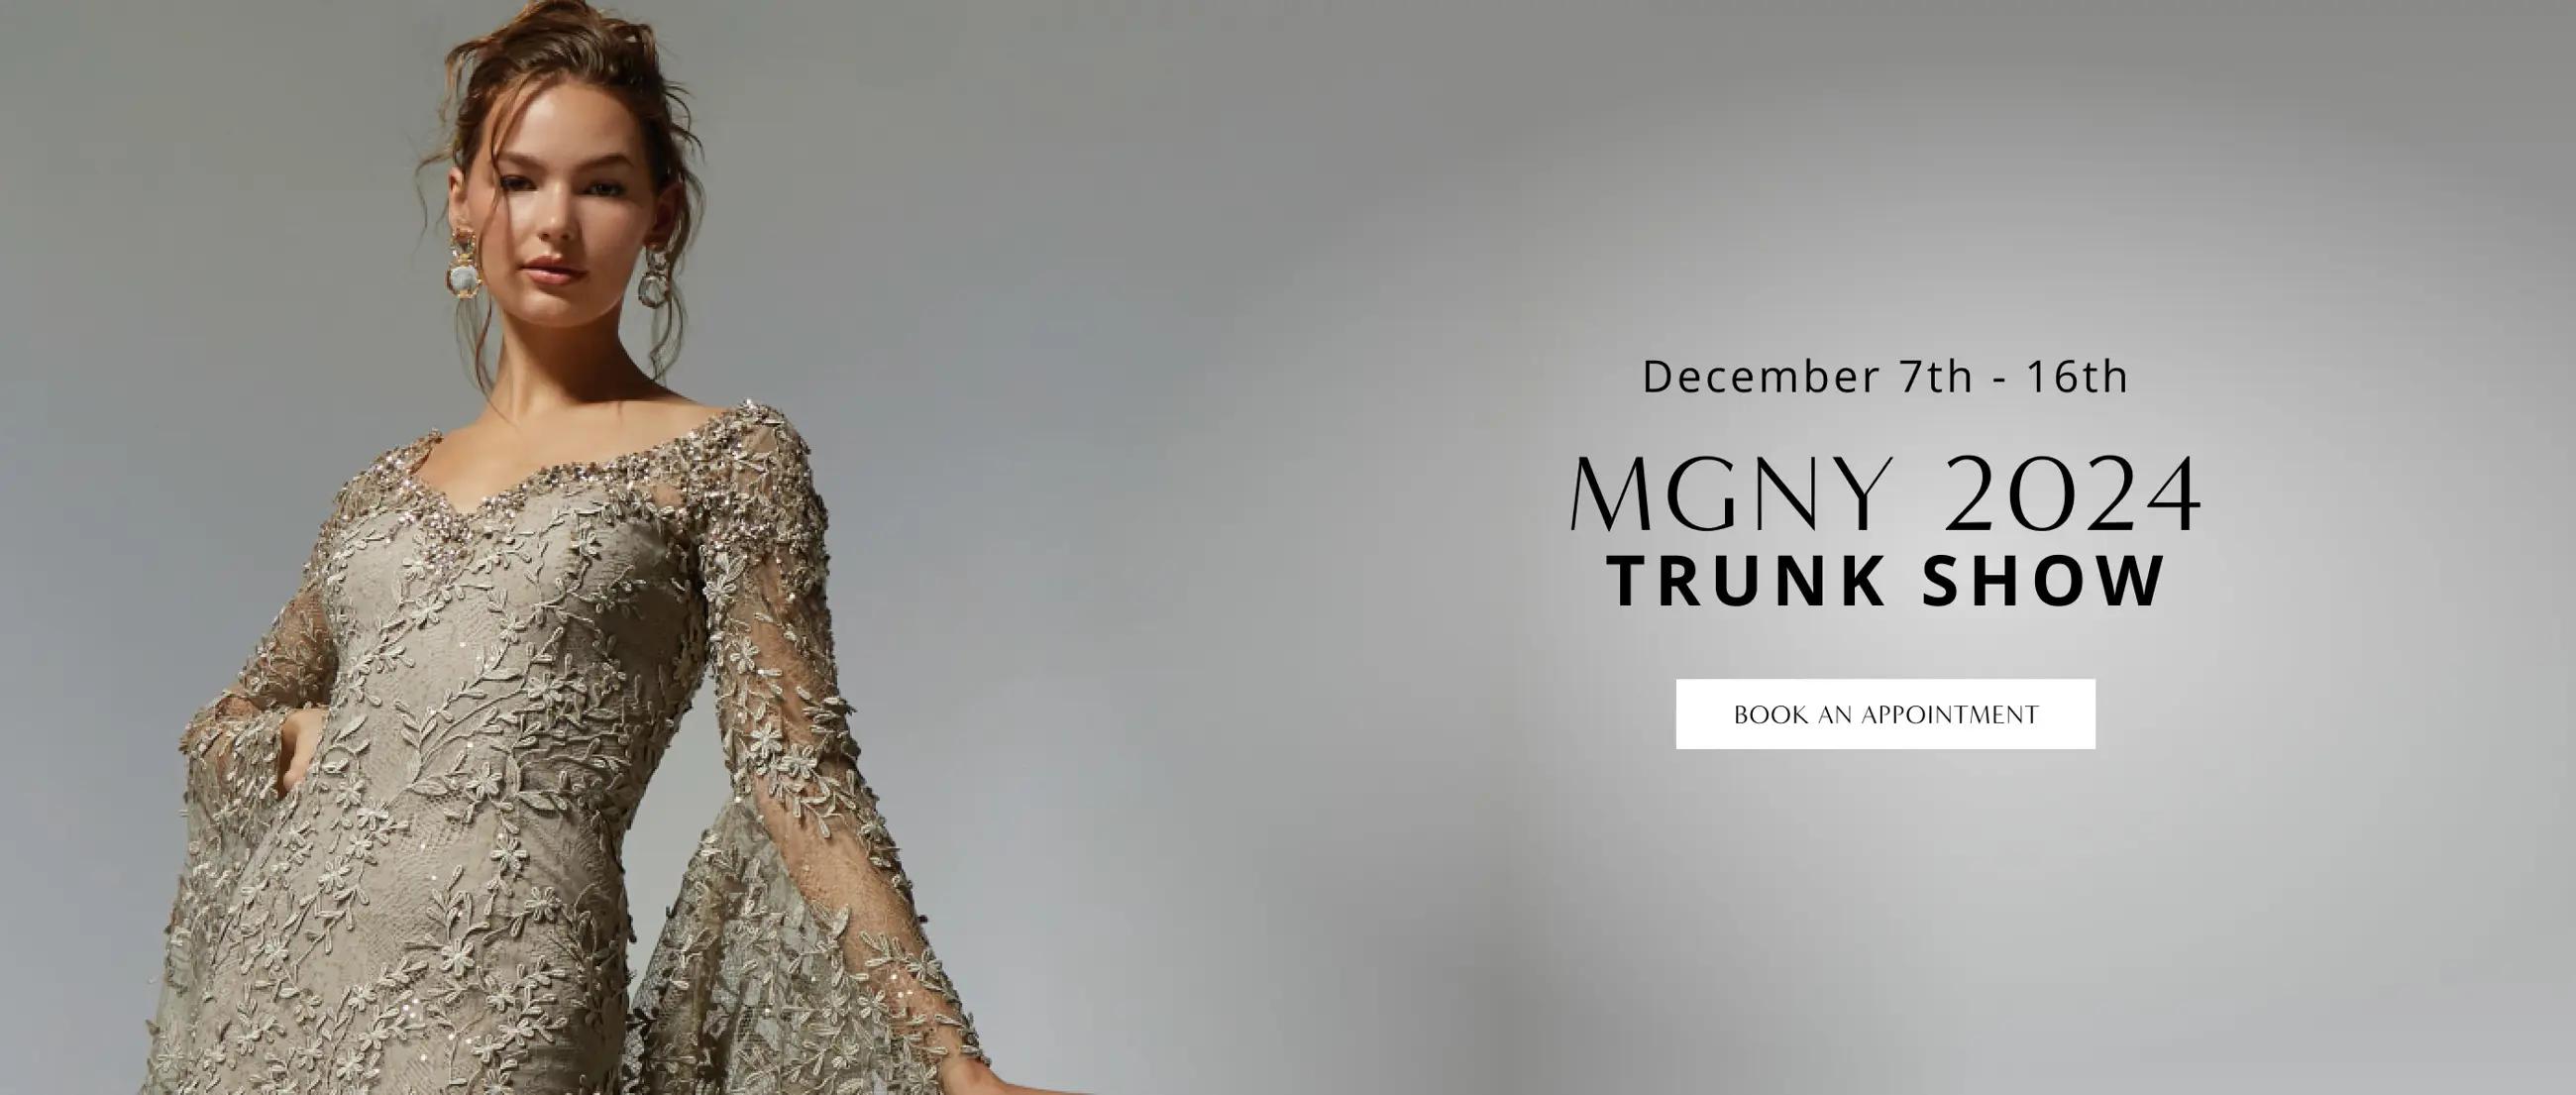 MGNY 2024 Trunk Show banner